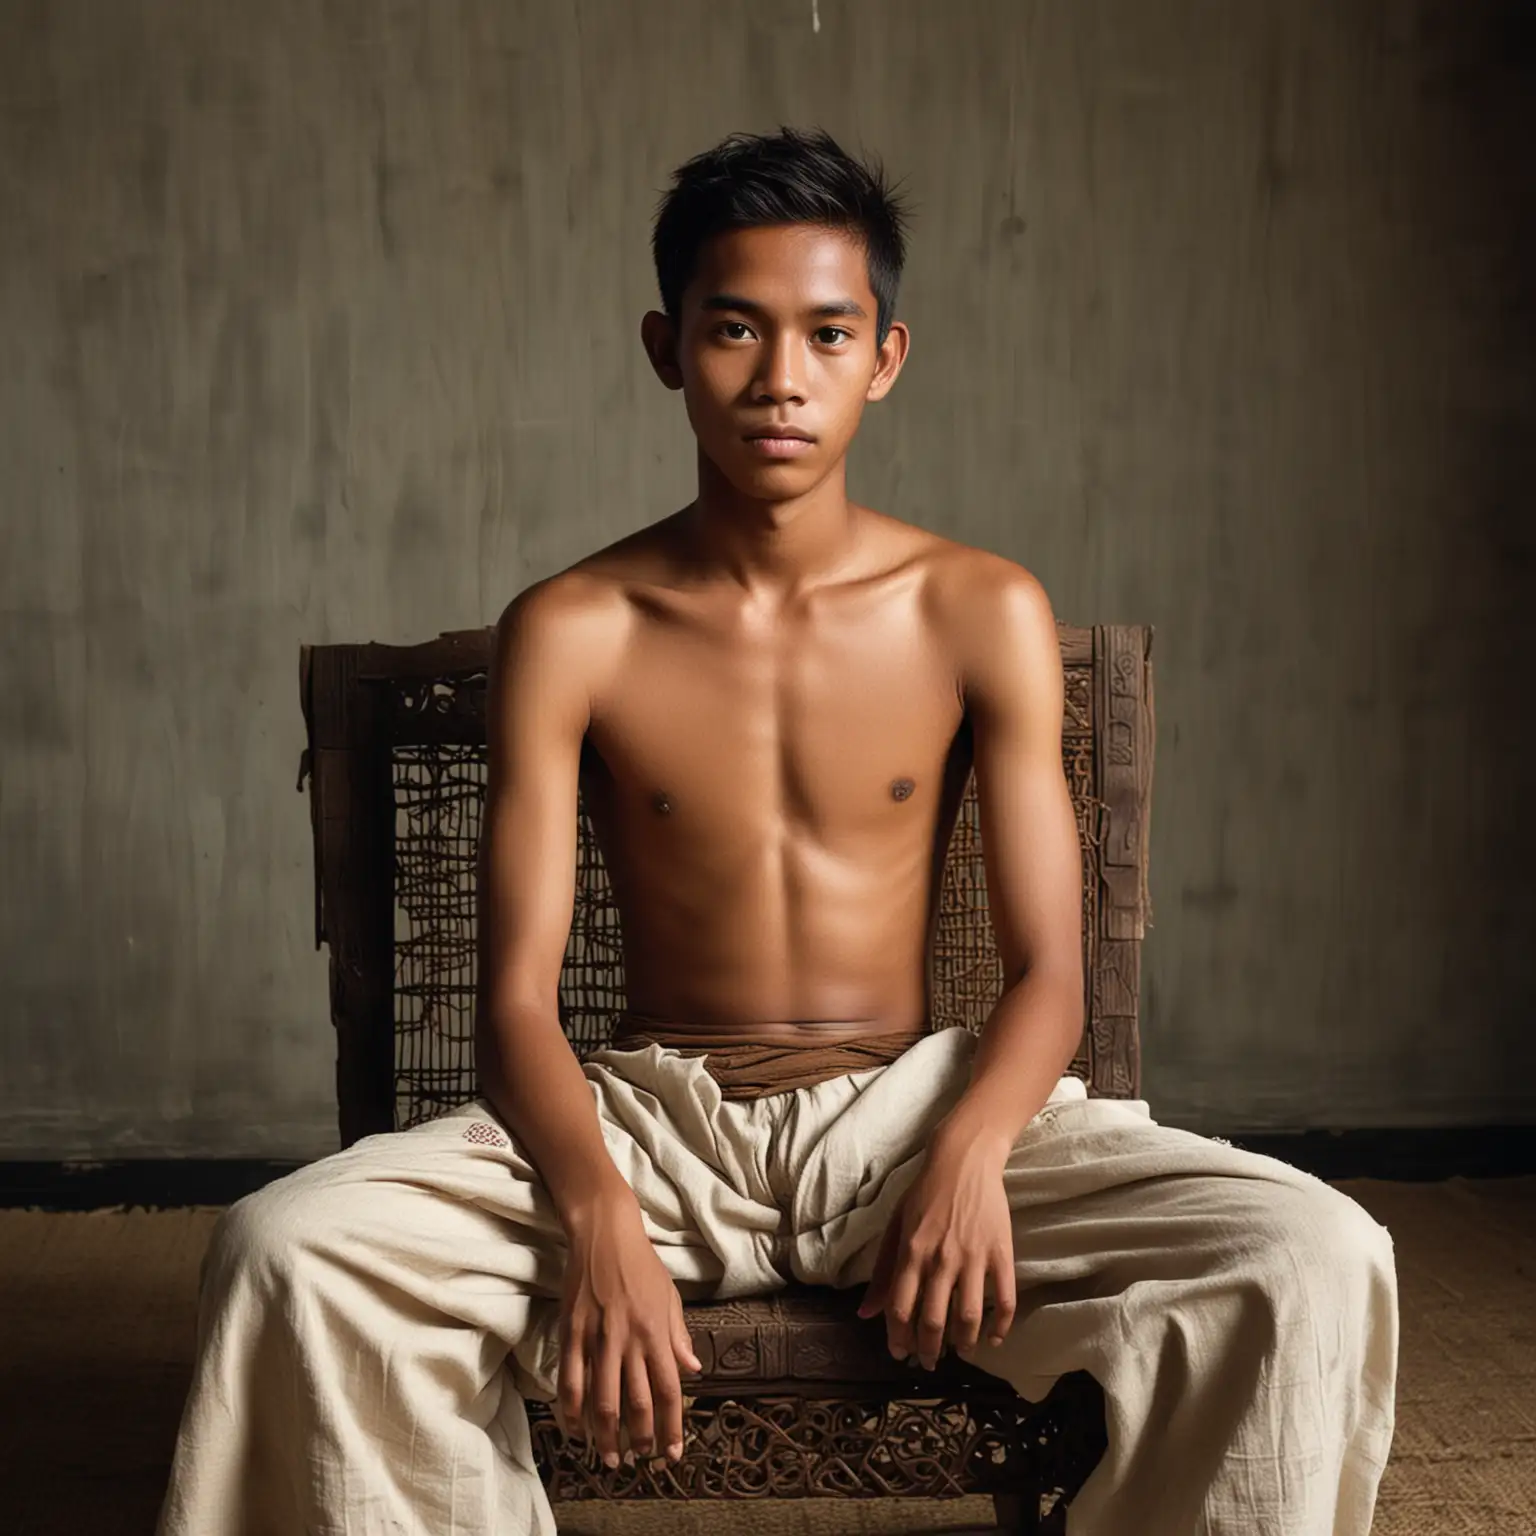 16 year old Indonesian man bare chested, wearing a long cloth, dark skin, sitting cross-legged on a traditional royal chair